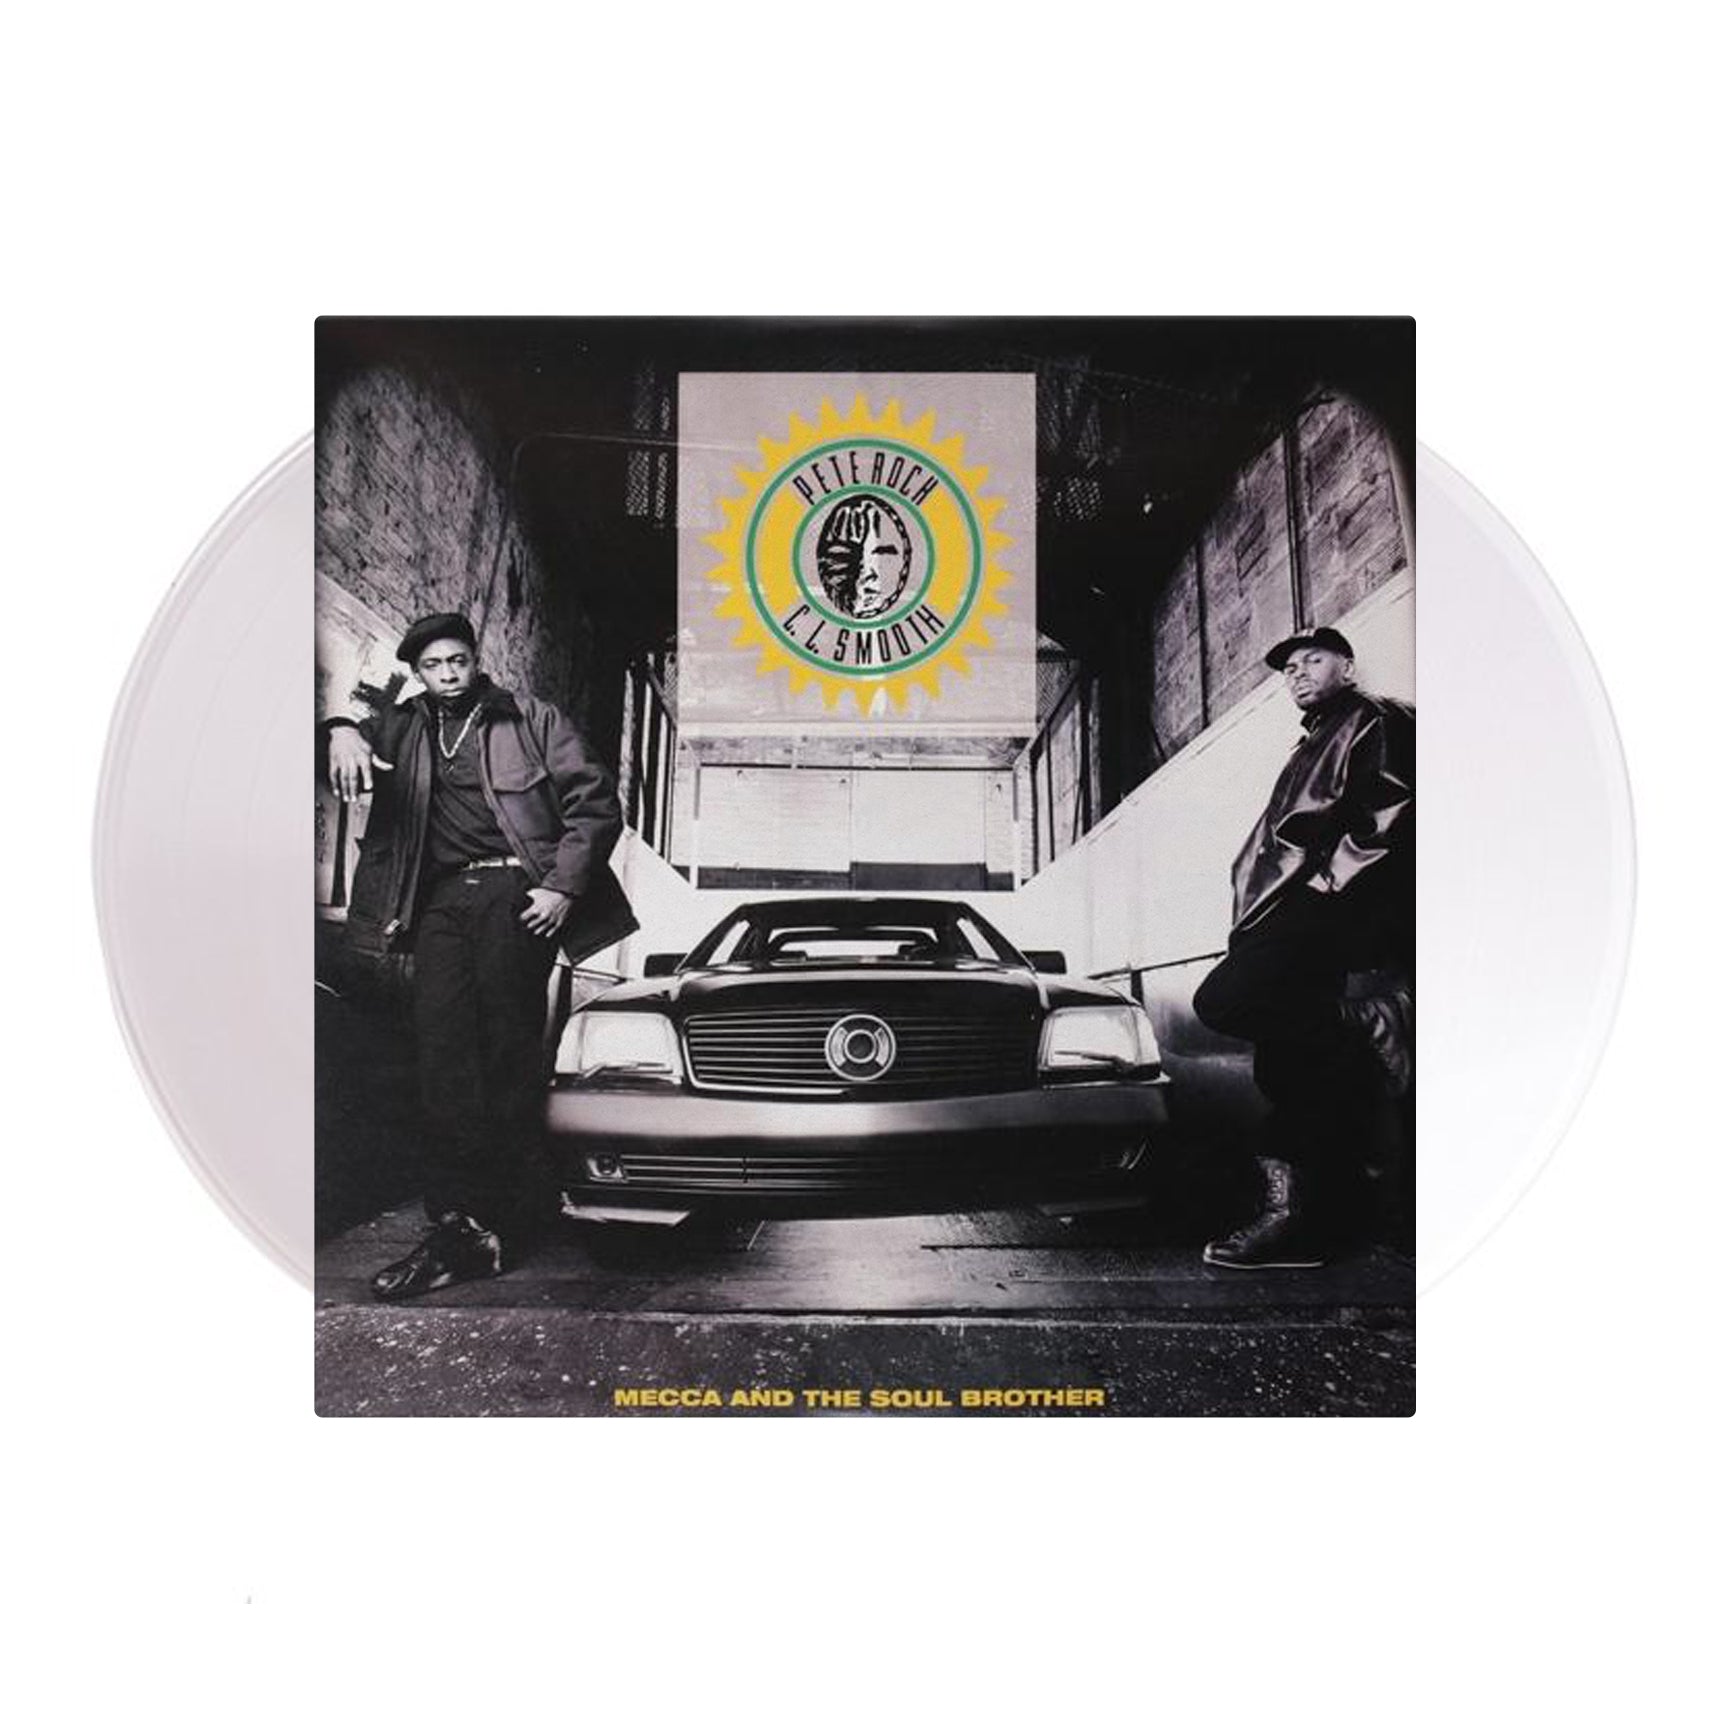 nyt år rigdom Muldyr Pete Rock & CL Smooth - Mecca And The Soul Brother (Clear Vinyl LP)